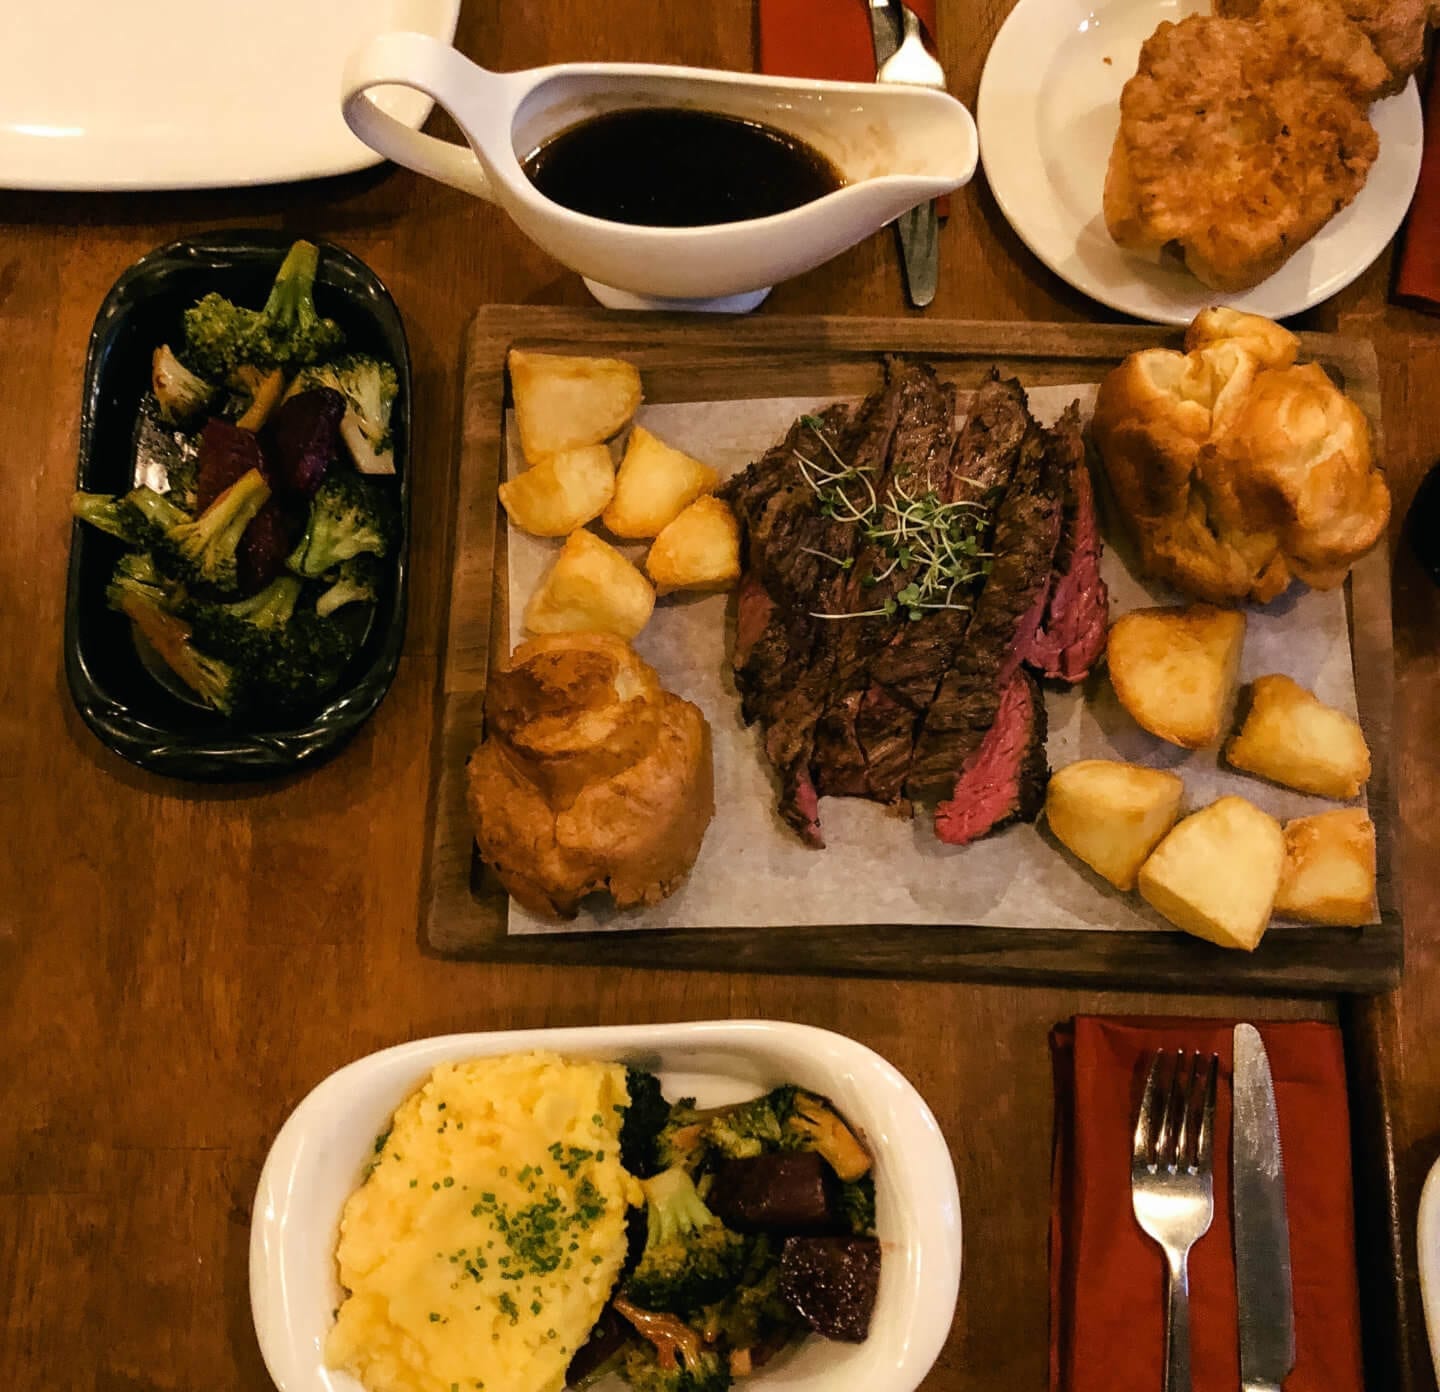 Sunday Roast at the Queen's Arms in Edinburgh